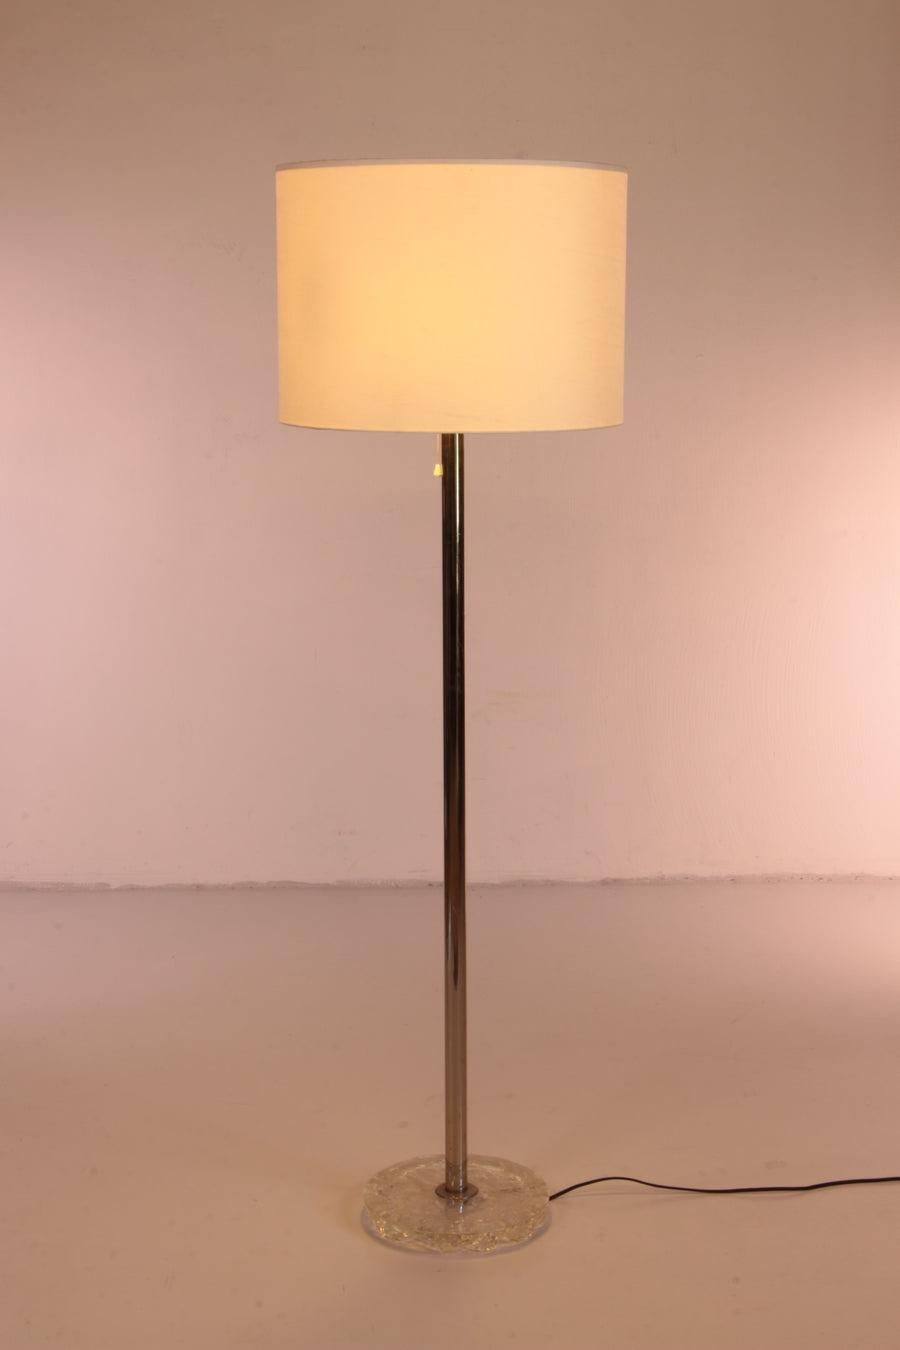 Large Floor Lamp with Chrome Stem and 3 Light Fittings in the Shade by Temde

Beautiful floor lamp with a Chrome stem and a glass base made by Temde.

The lamp has 3 light points, 2 under the shade and 1 above it.

3 R27 connection.

Additional